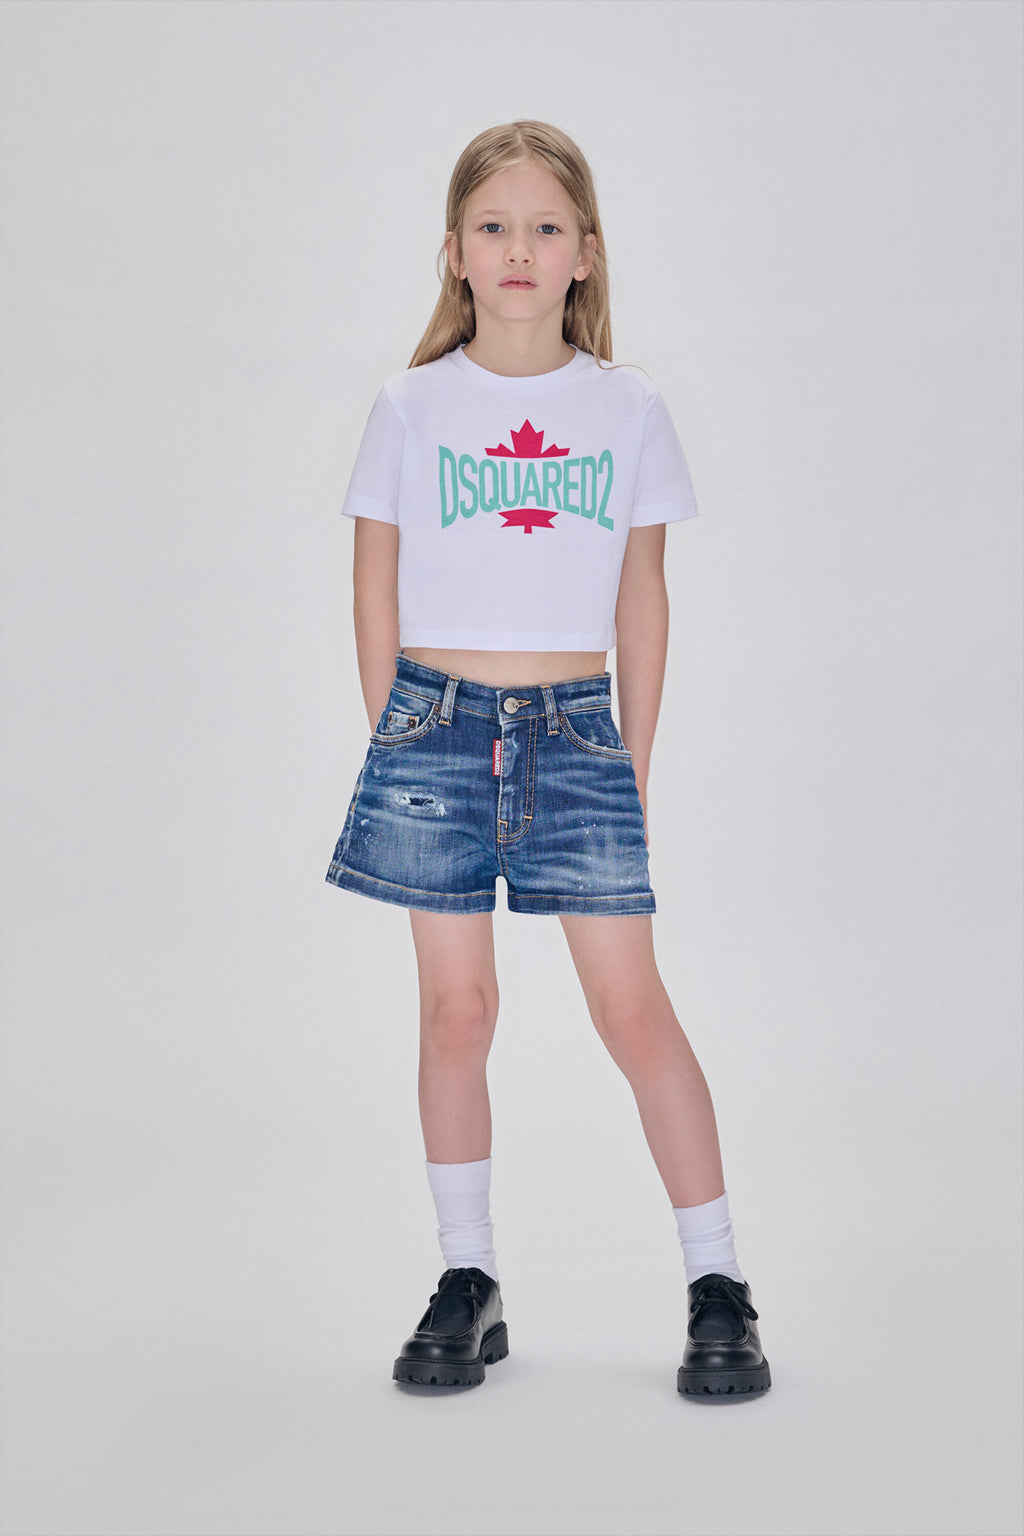 School girl skirt with shorts, no brand name. China